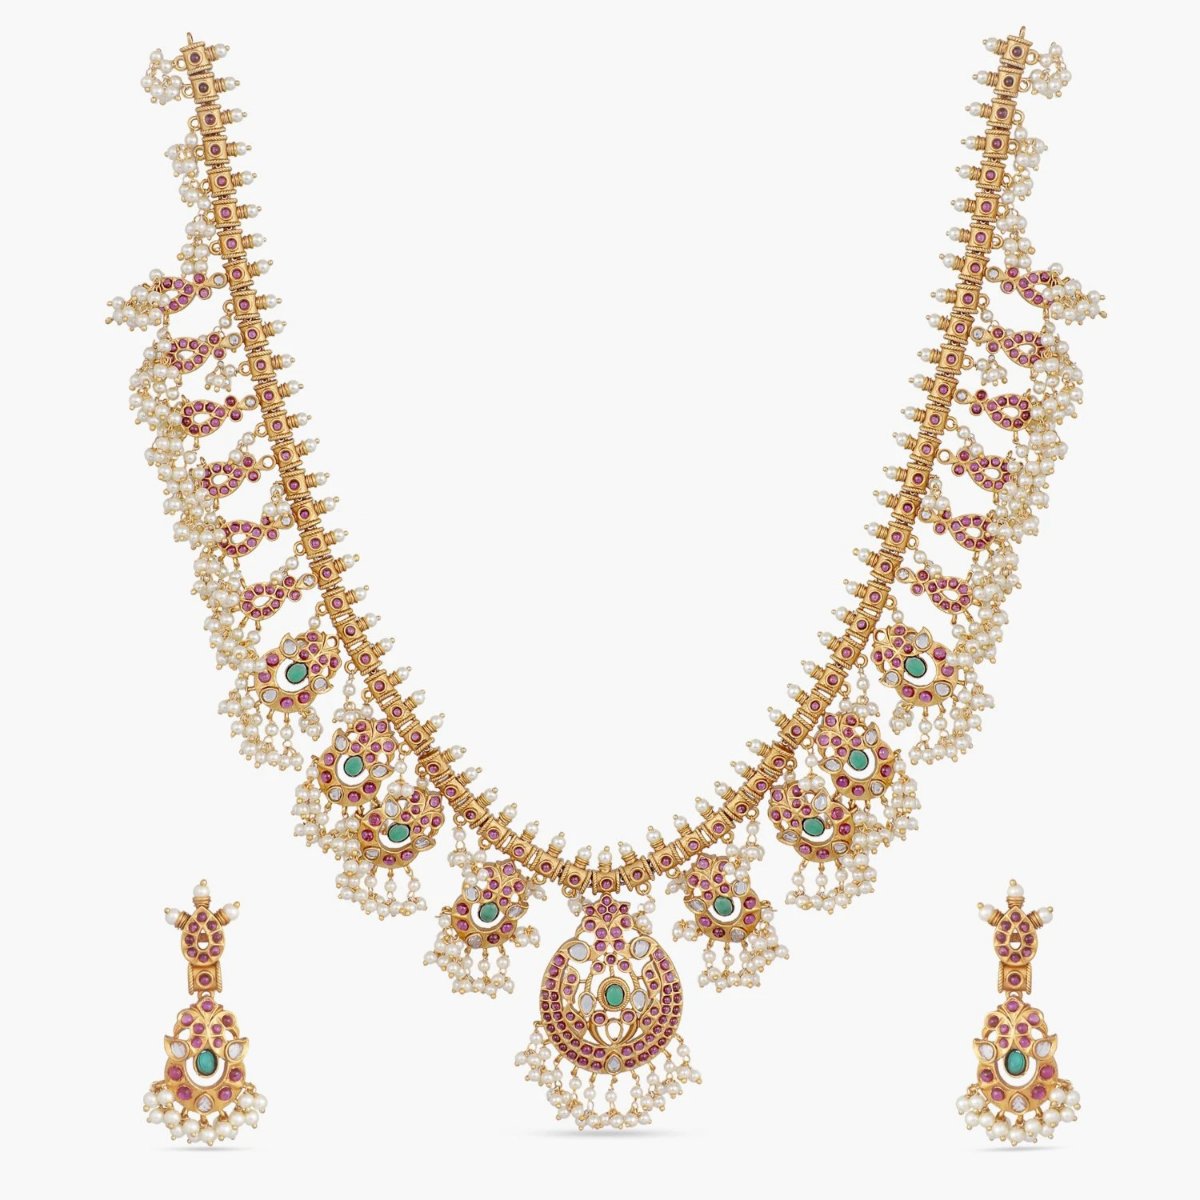 A picture of an Indian artificial necklace set with a gold-toned chain and a large pendant with floral designs. The pendant has red and green gemstones.